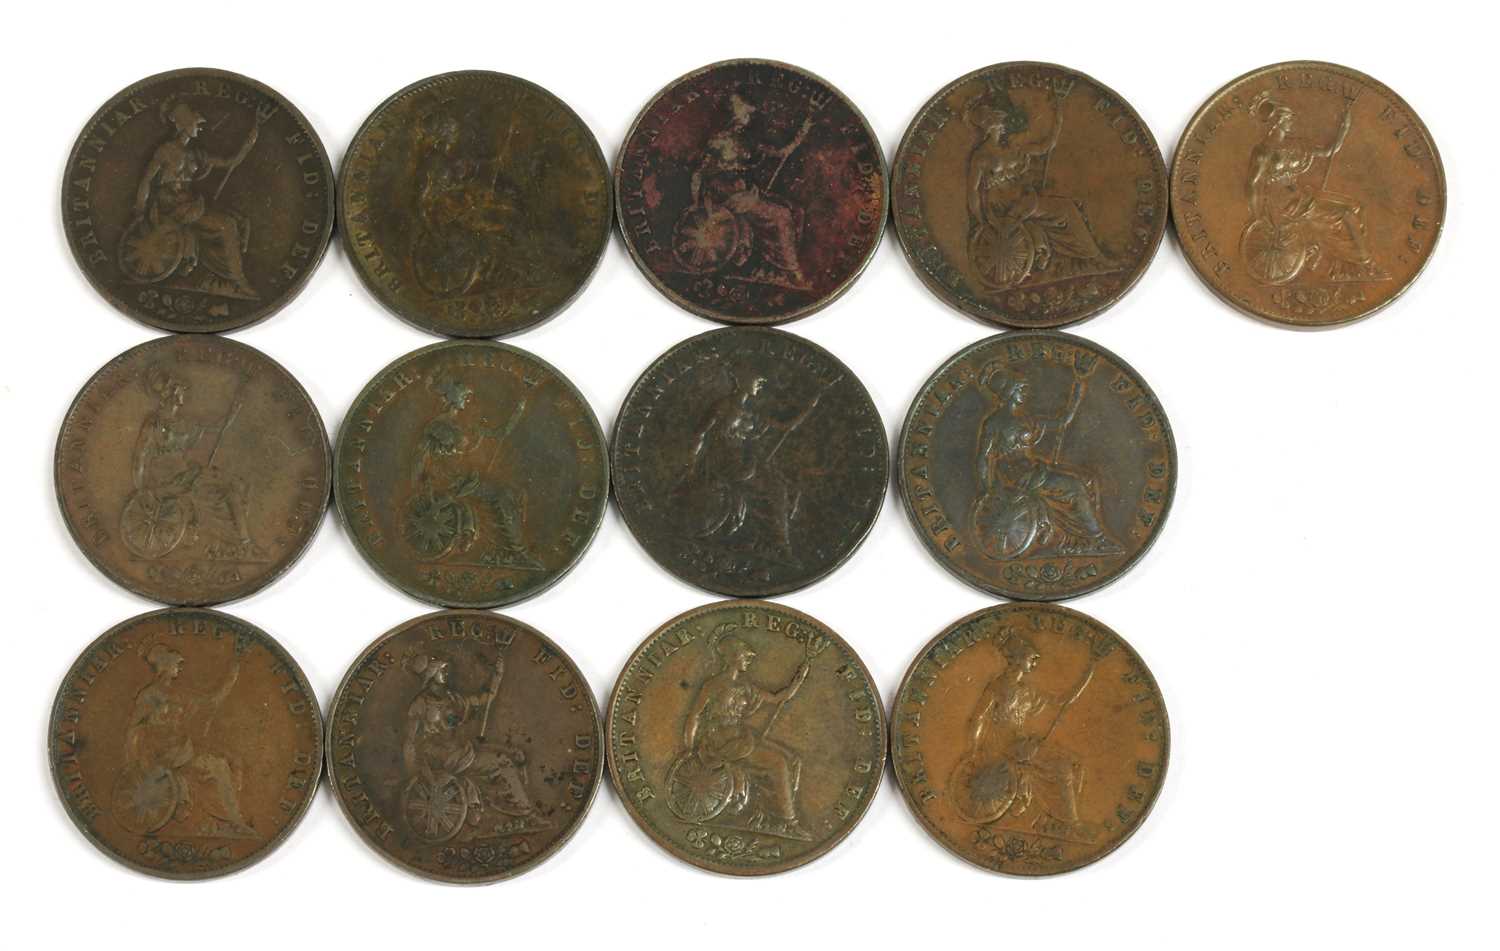 Coins, Great Britain, Victoria (1837-1901), - Image 2 of 2